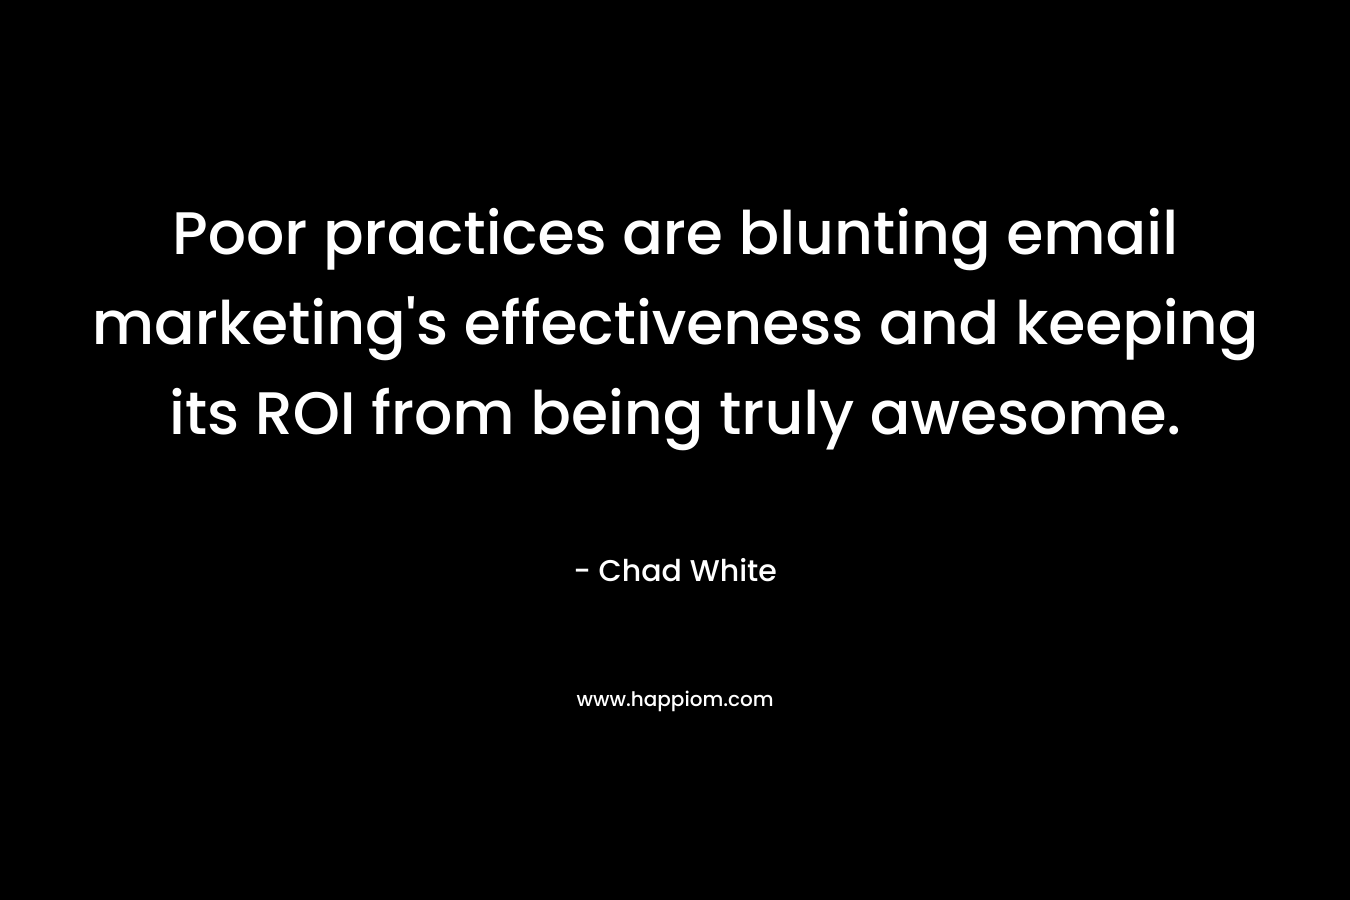 Poor practices are blunting email marketing’s effectiveness and keeping its ROI from being truly awesome. – Chad White